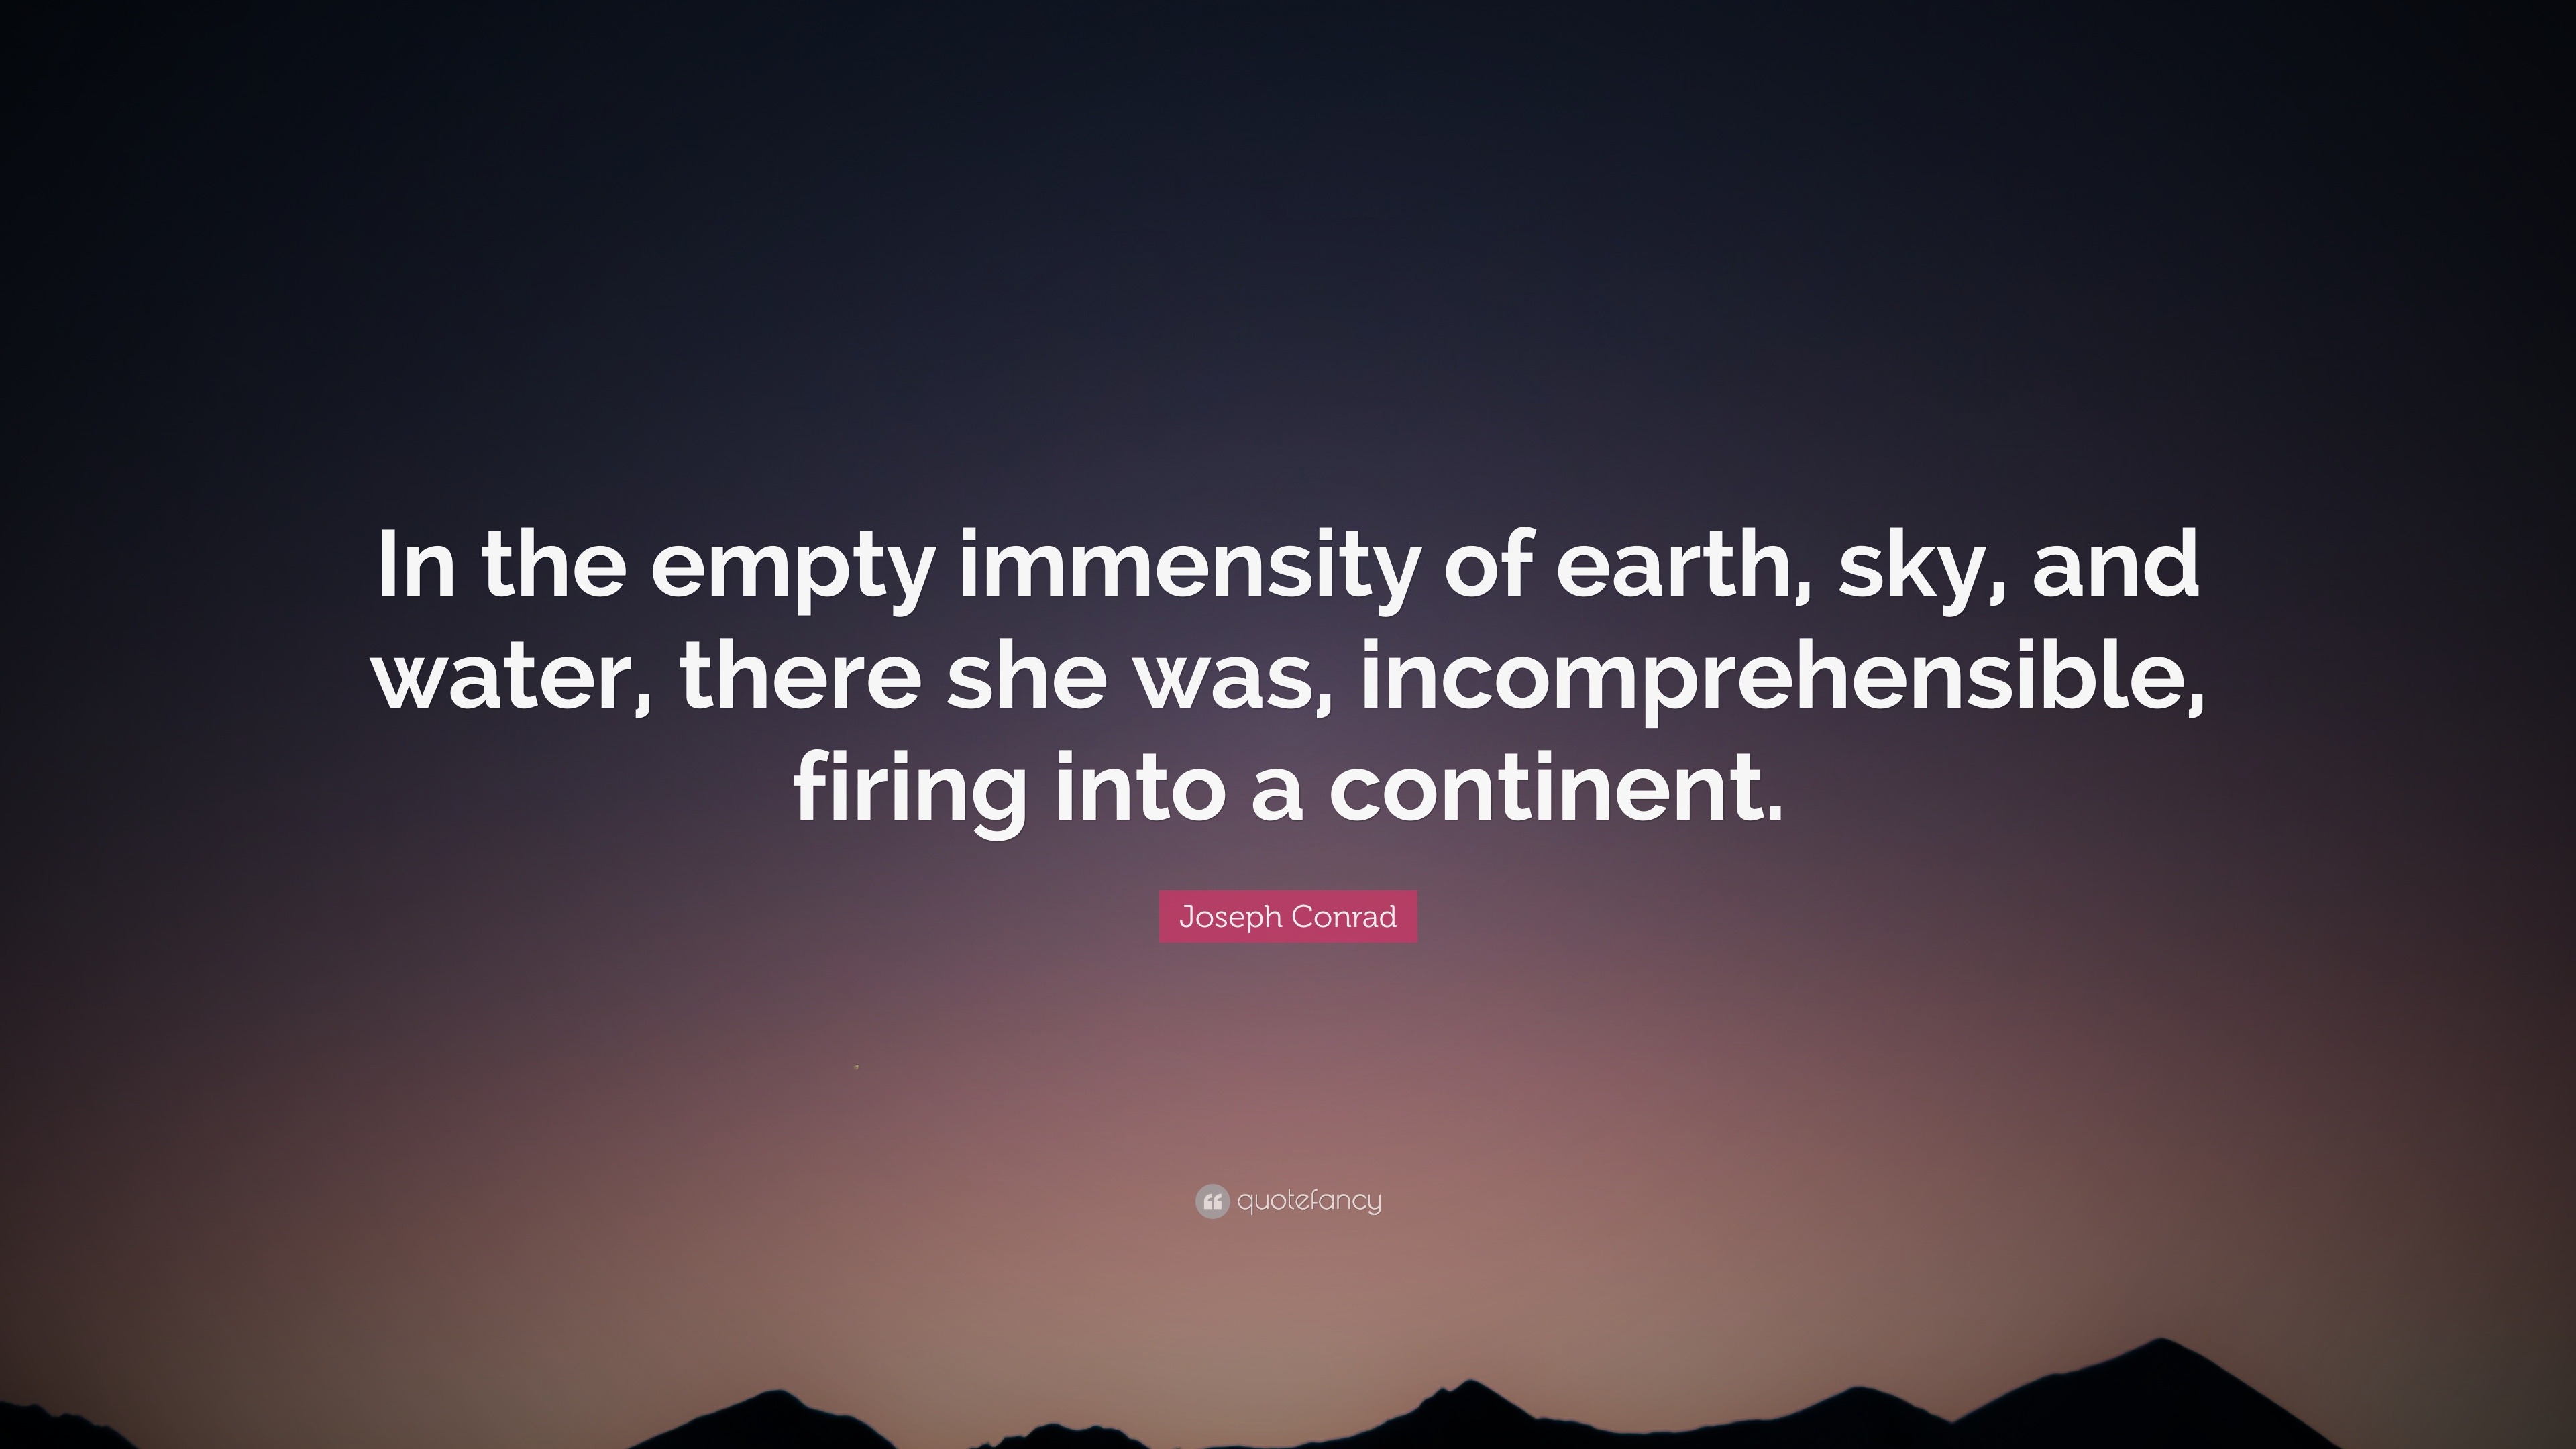 Joseph Conrad Quote: “In the empty immensity of earth, sky, and water ...